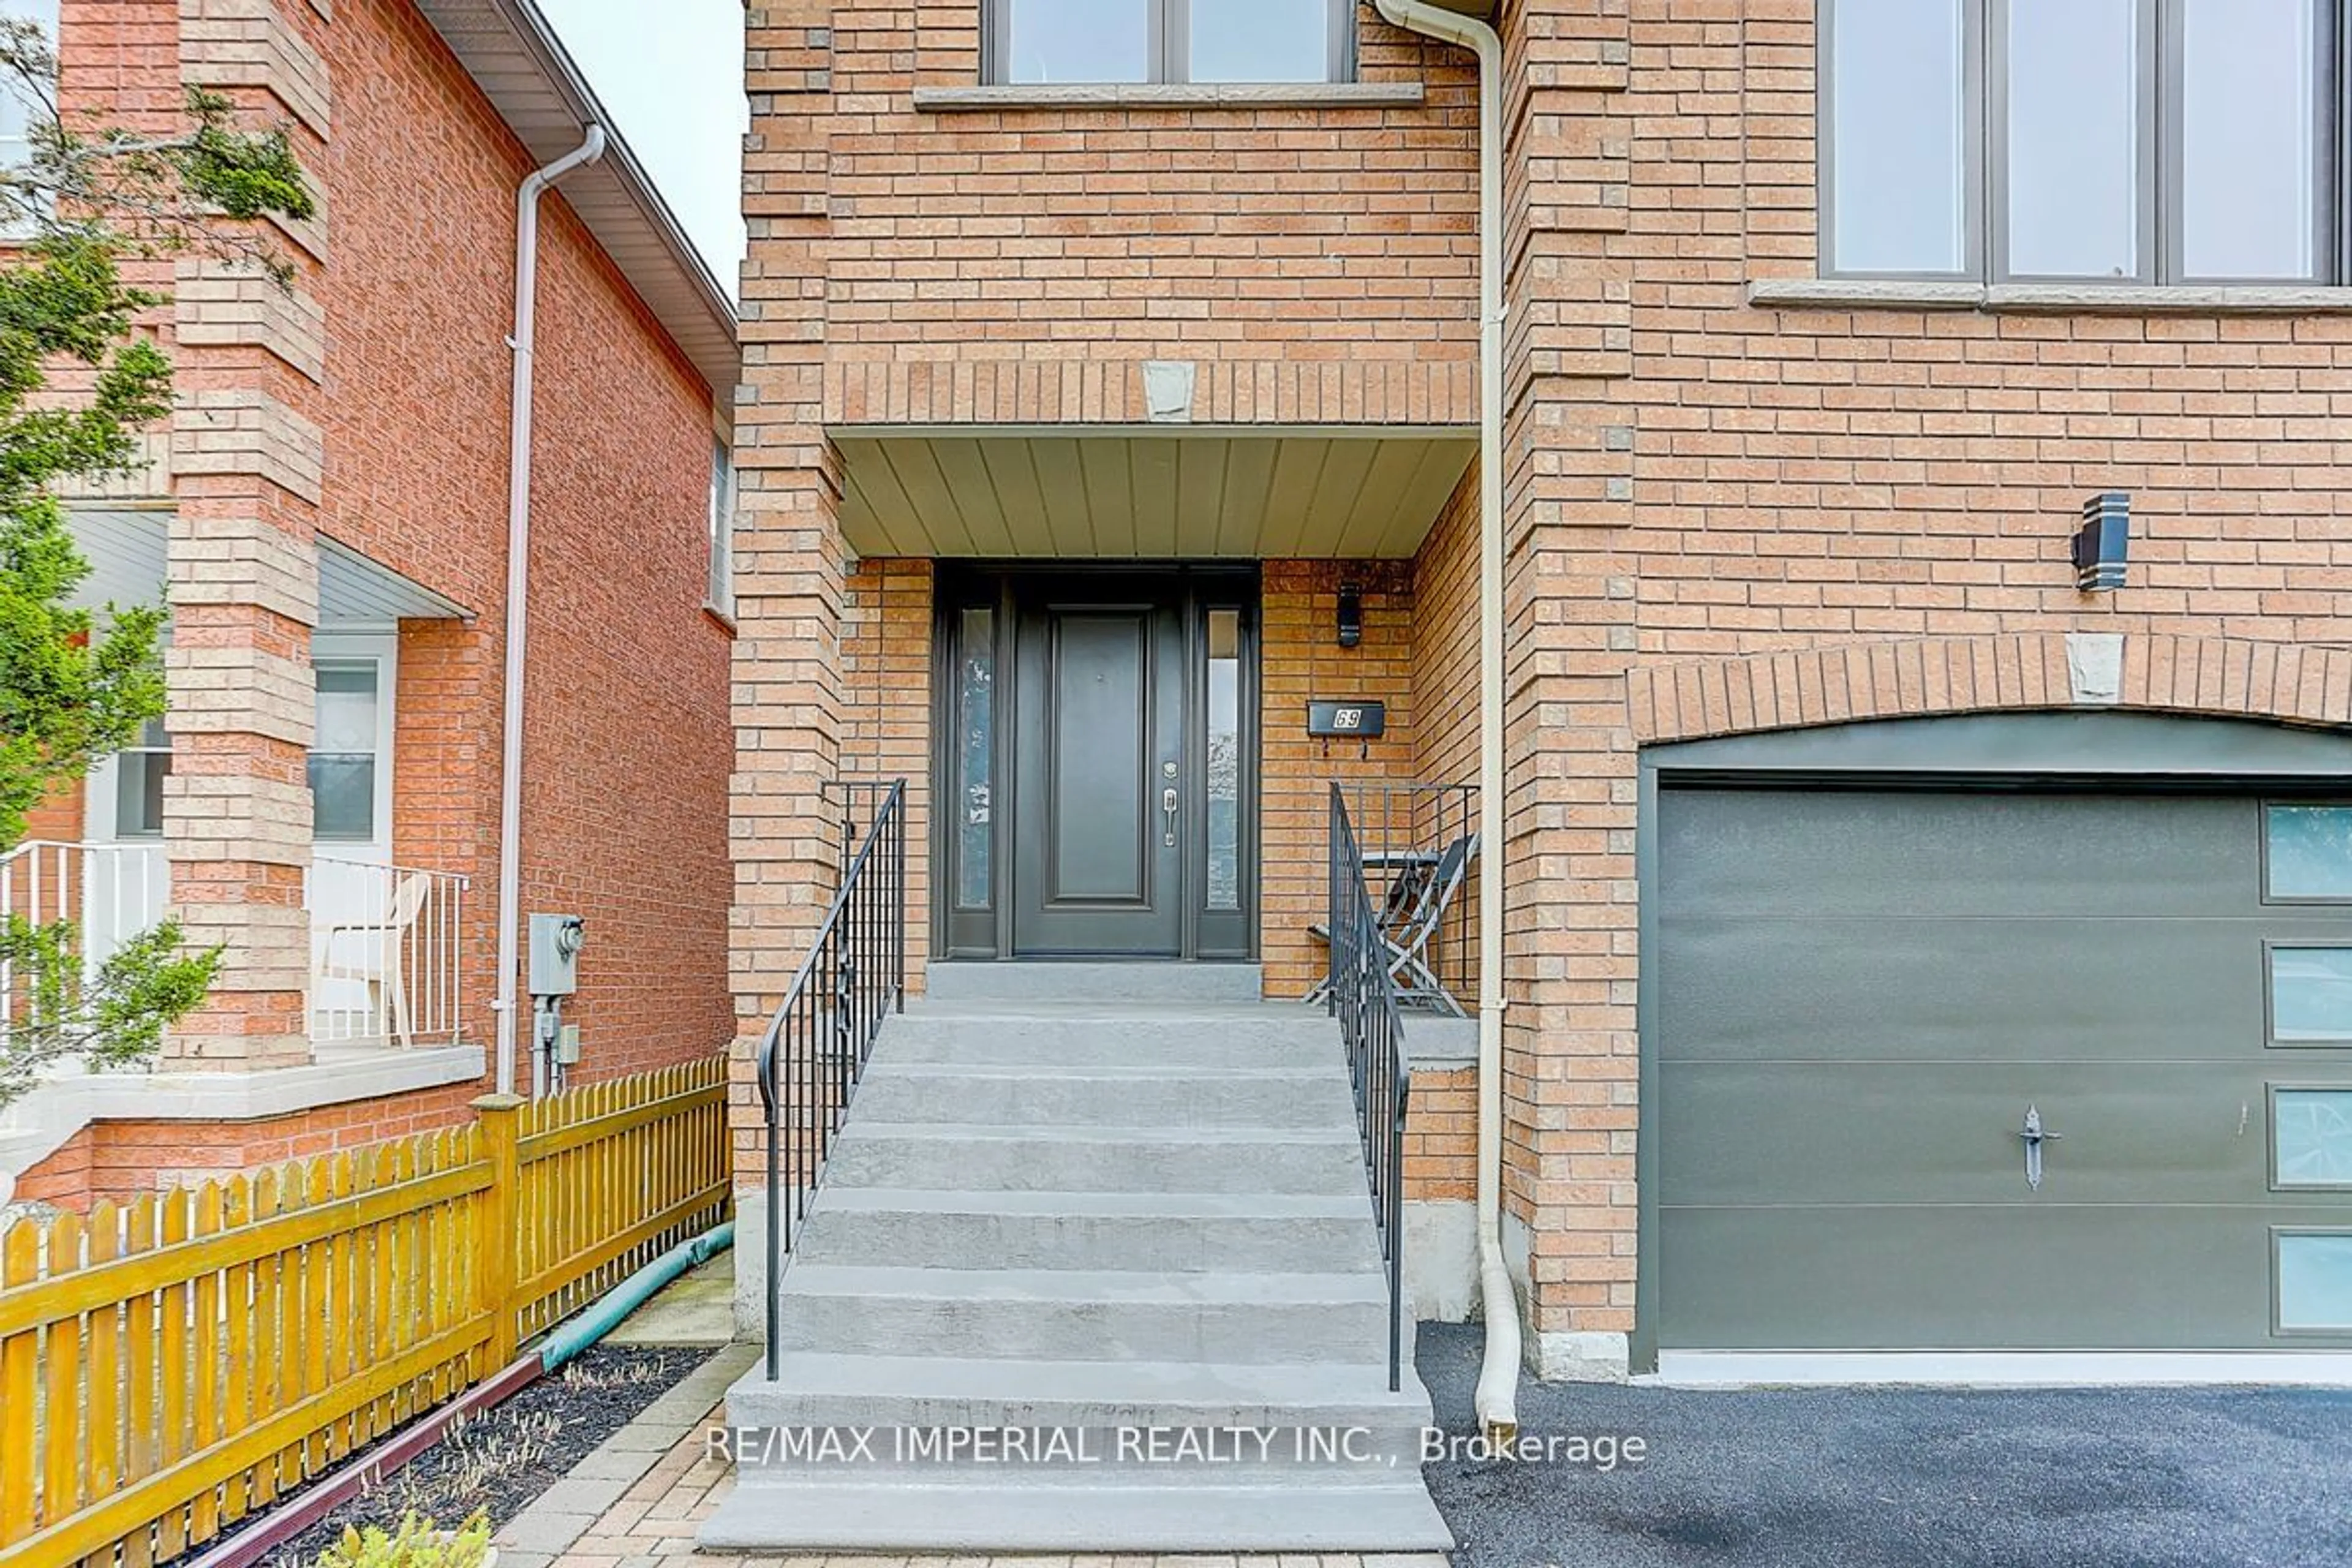 Home with brick exterior material for 69 Stephenson Cres, Richmond Hill Ontario L4C 5T3